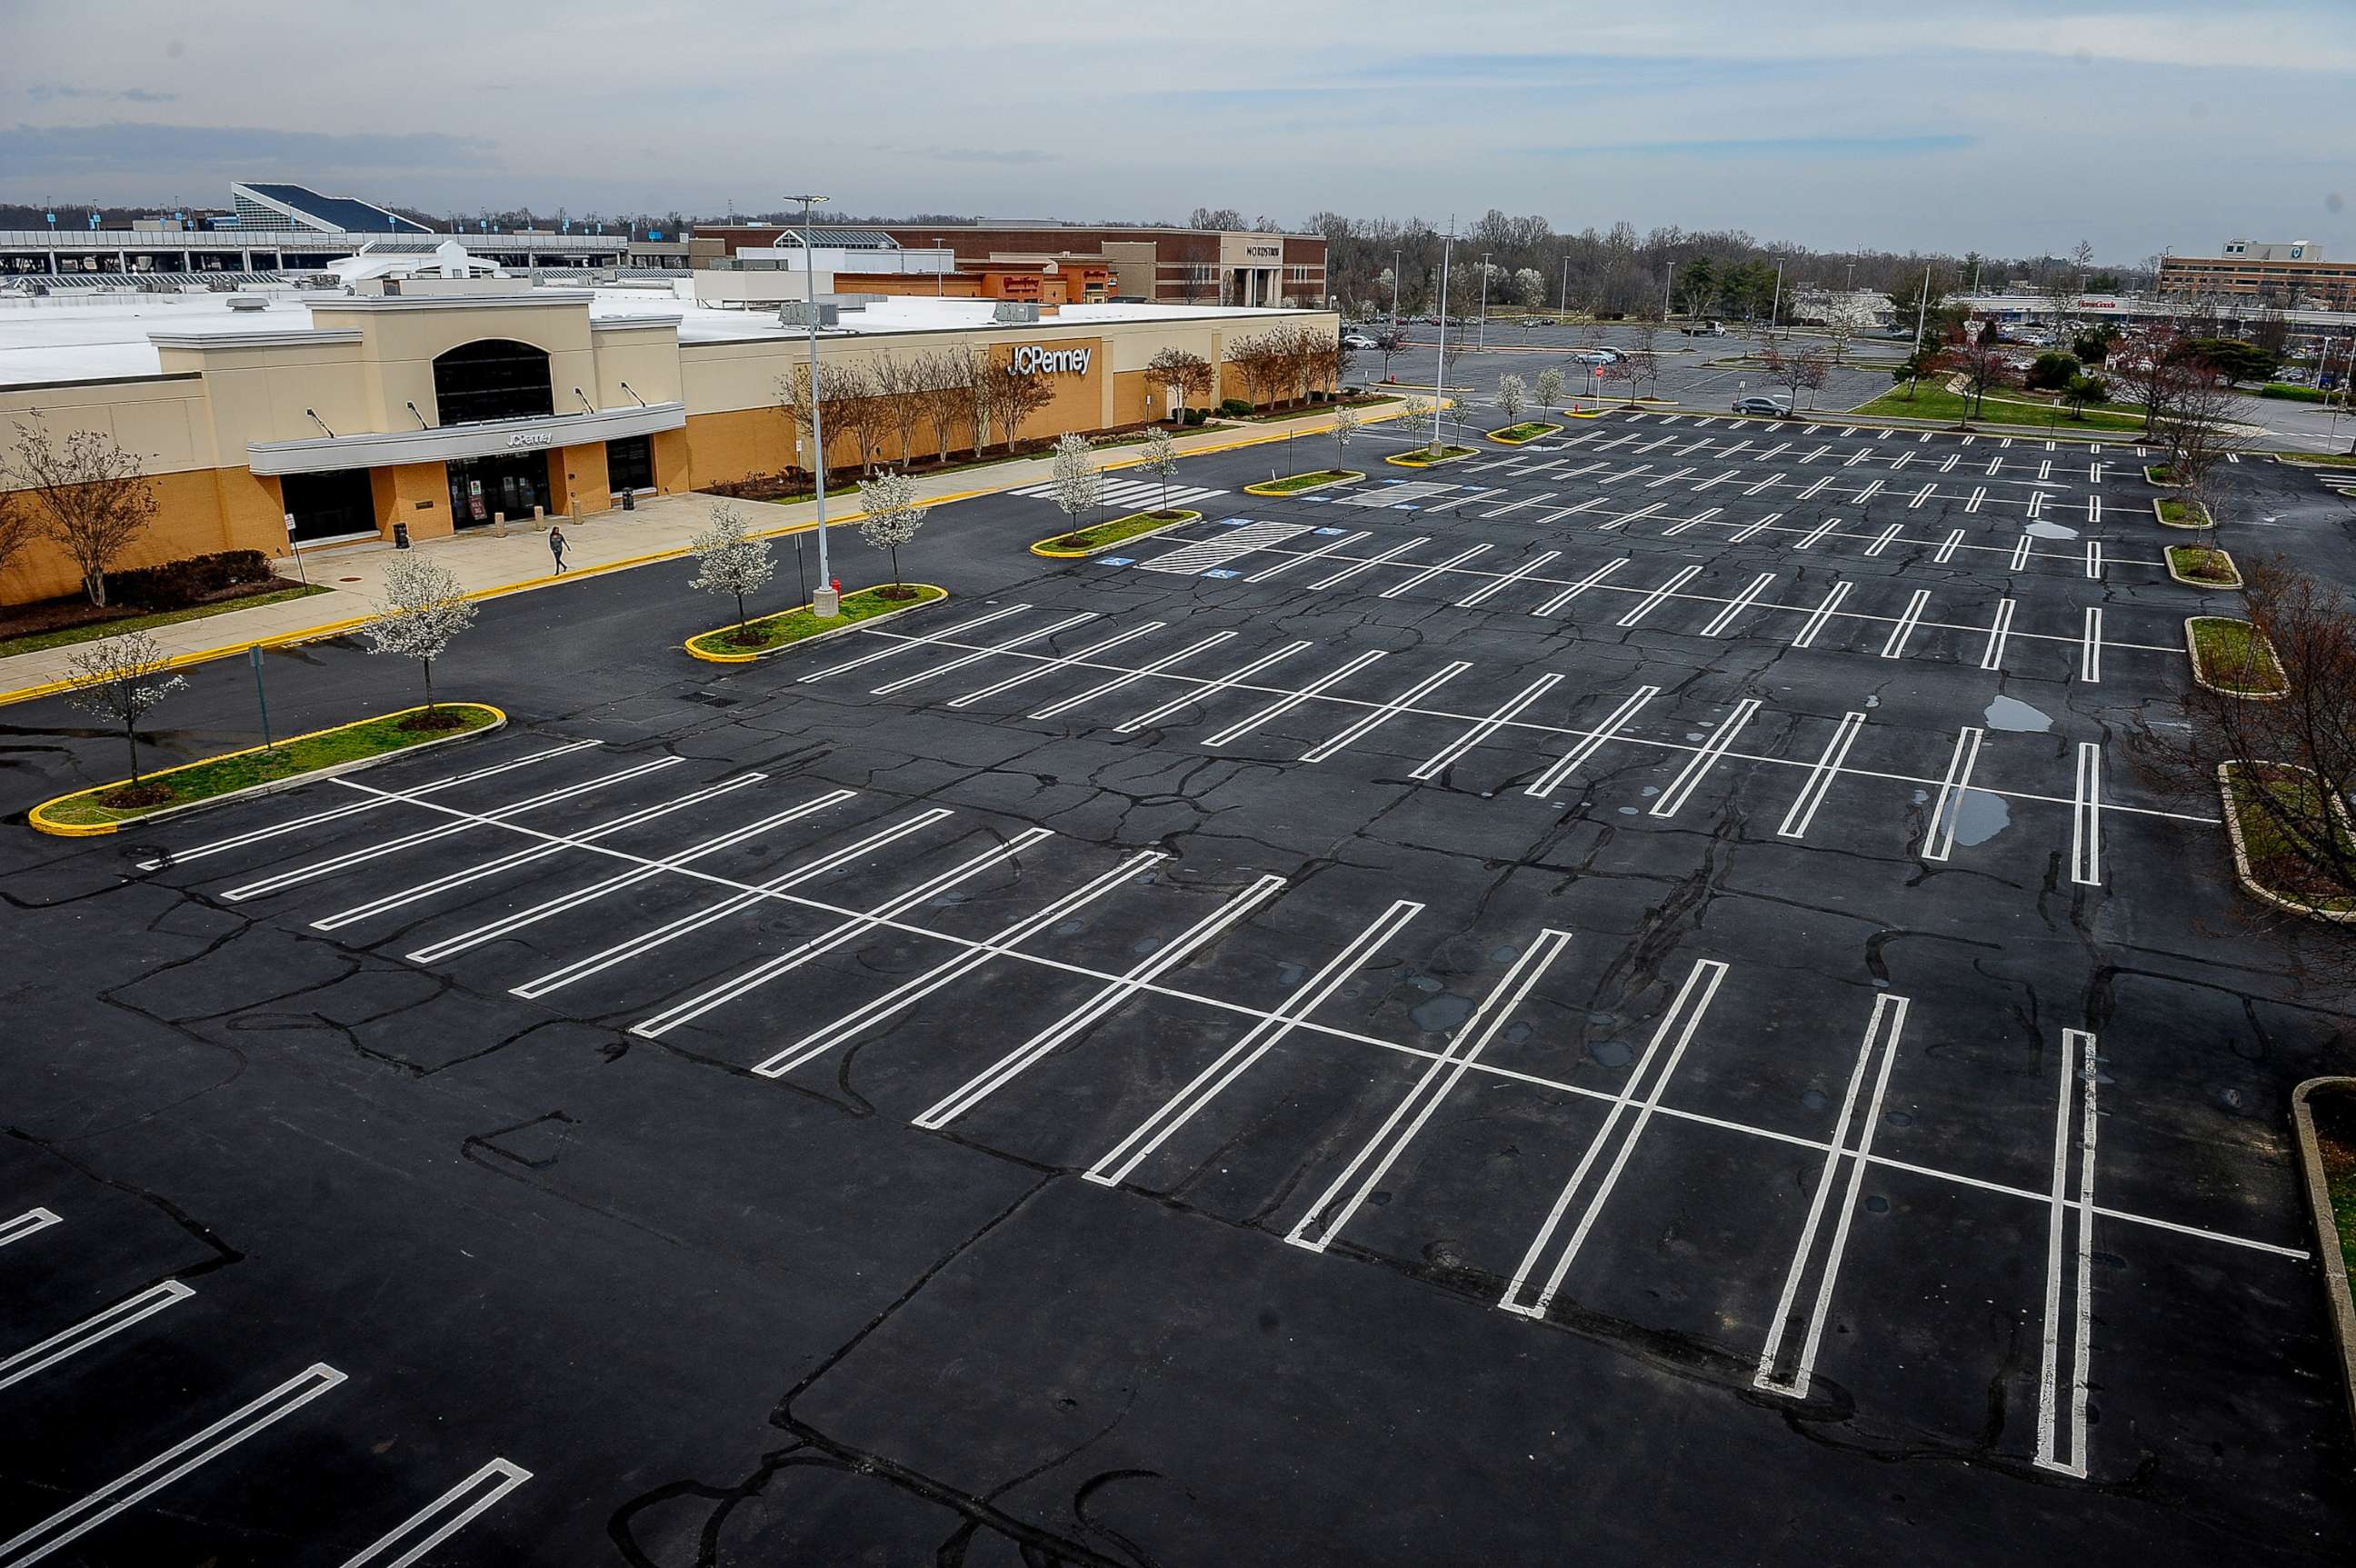 PHOTO: An almost empty parking lot at a shopping mall in Annapolis, Md., after all malls were closed to prevent the spread of coronavirus disease (COVID-19), March 19, 2020.